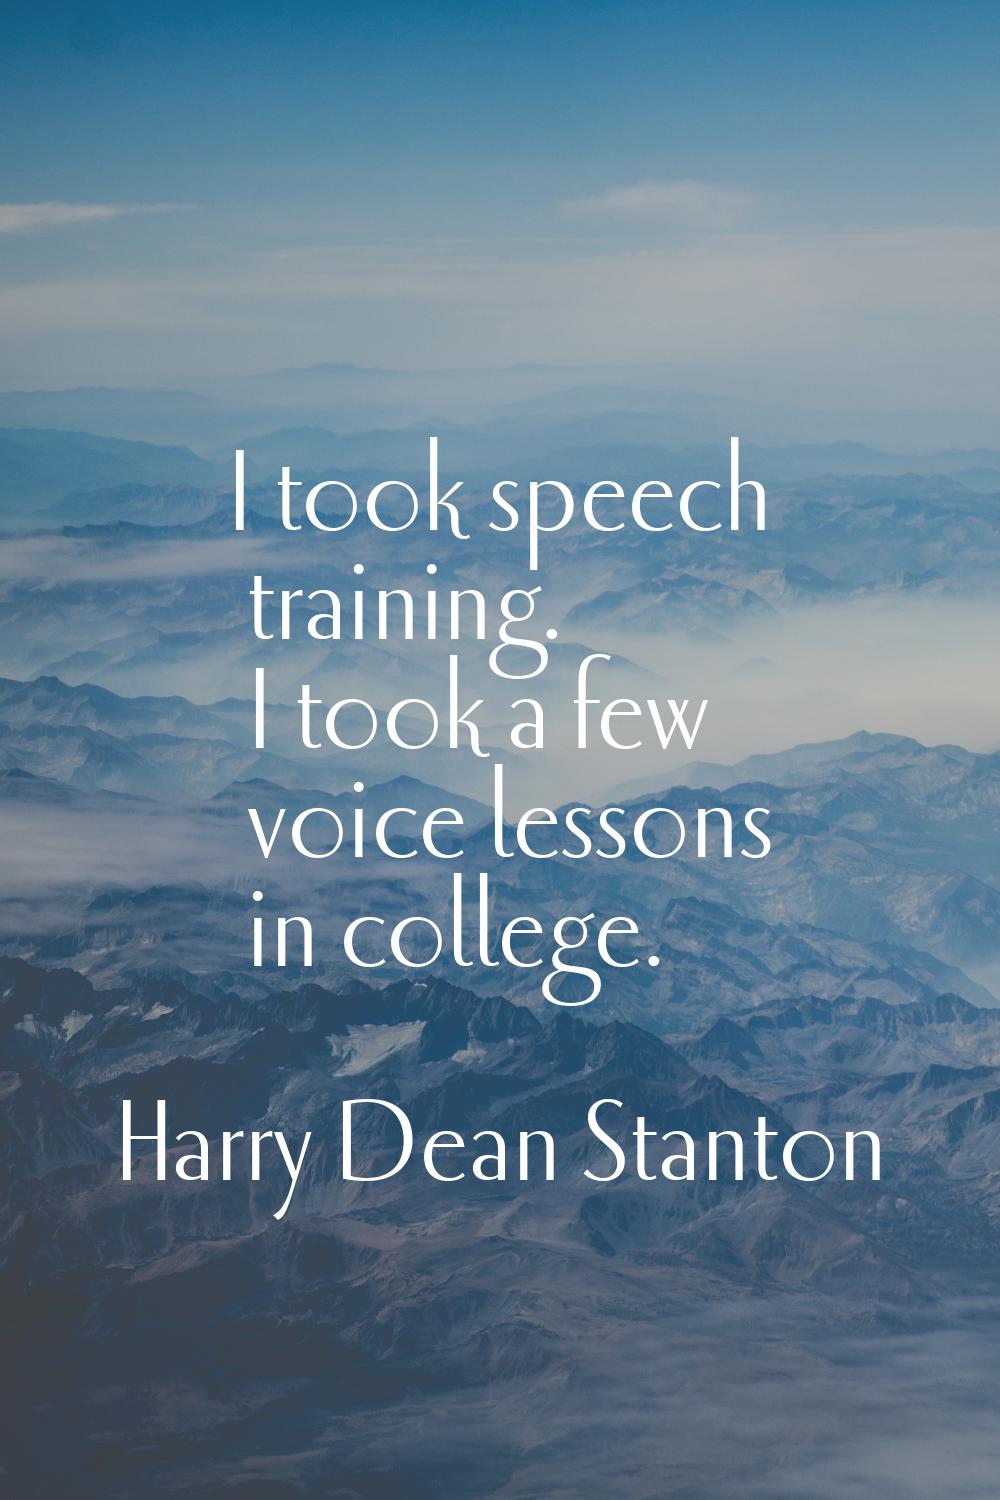 I took speech training. I took a few voice lessons in college.